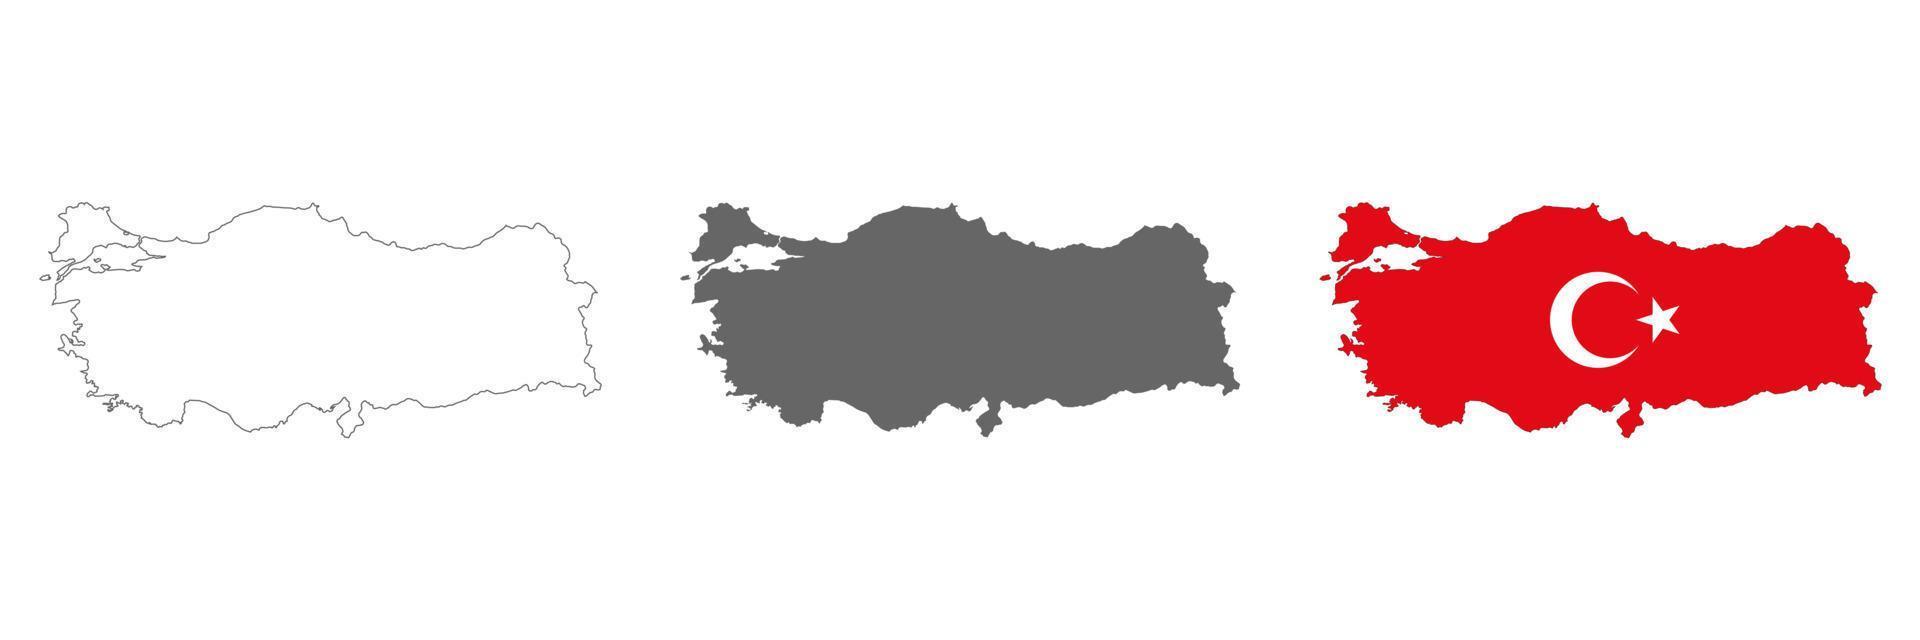 Highly detailed Turkey map with borders isolated on background vector